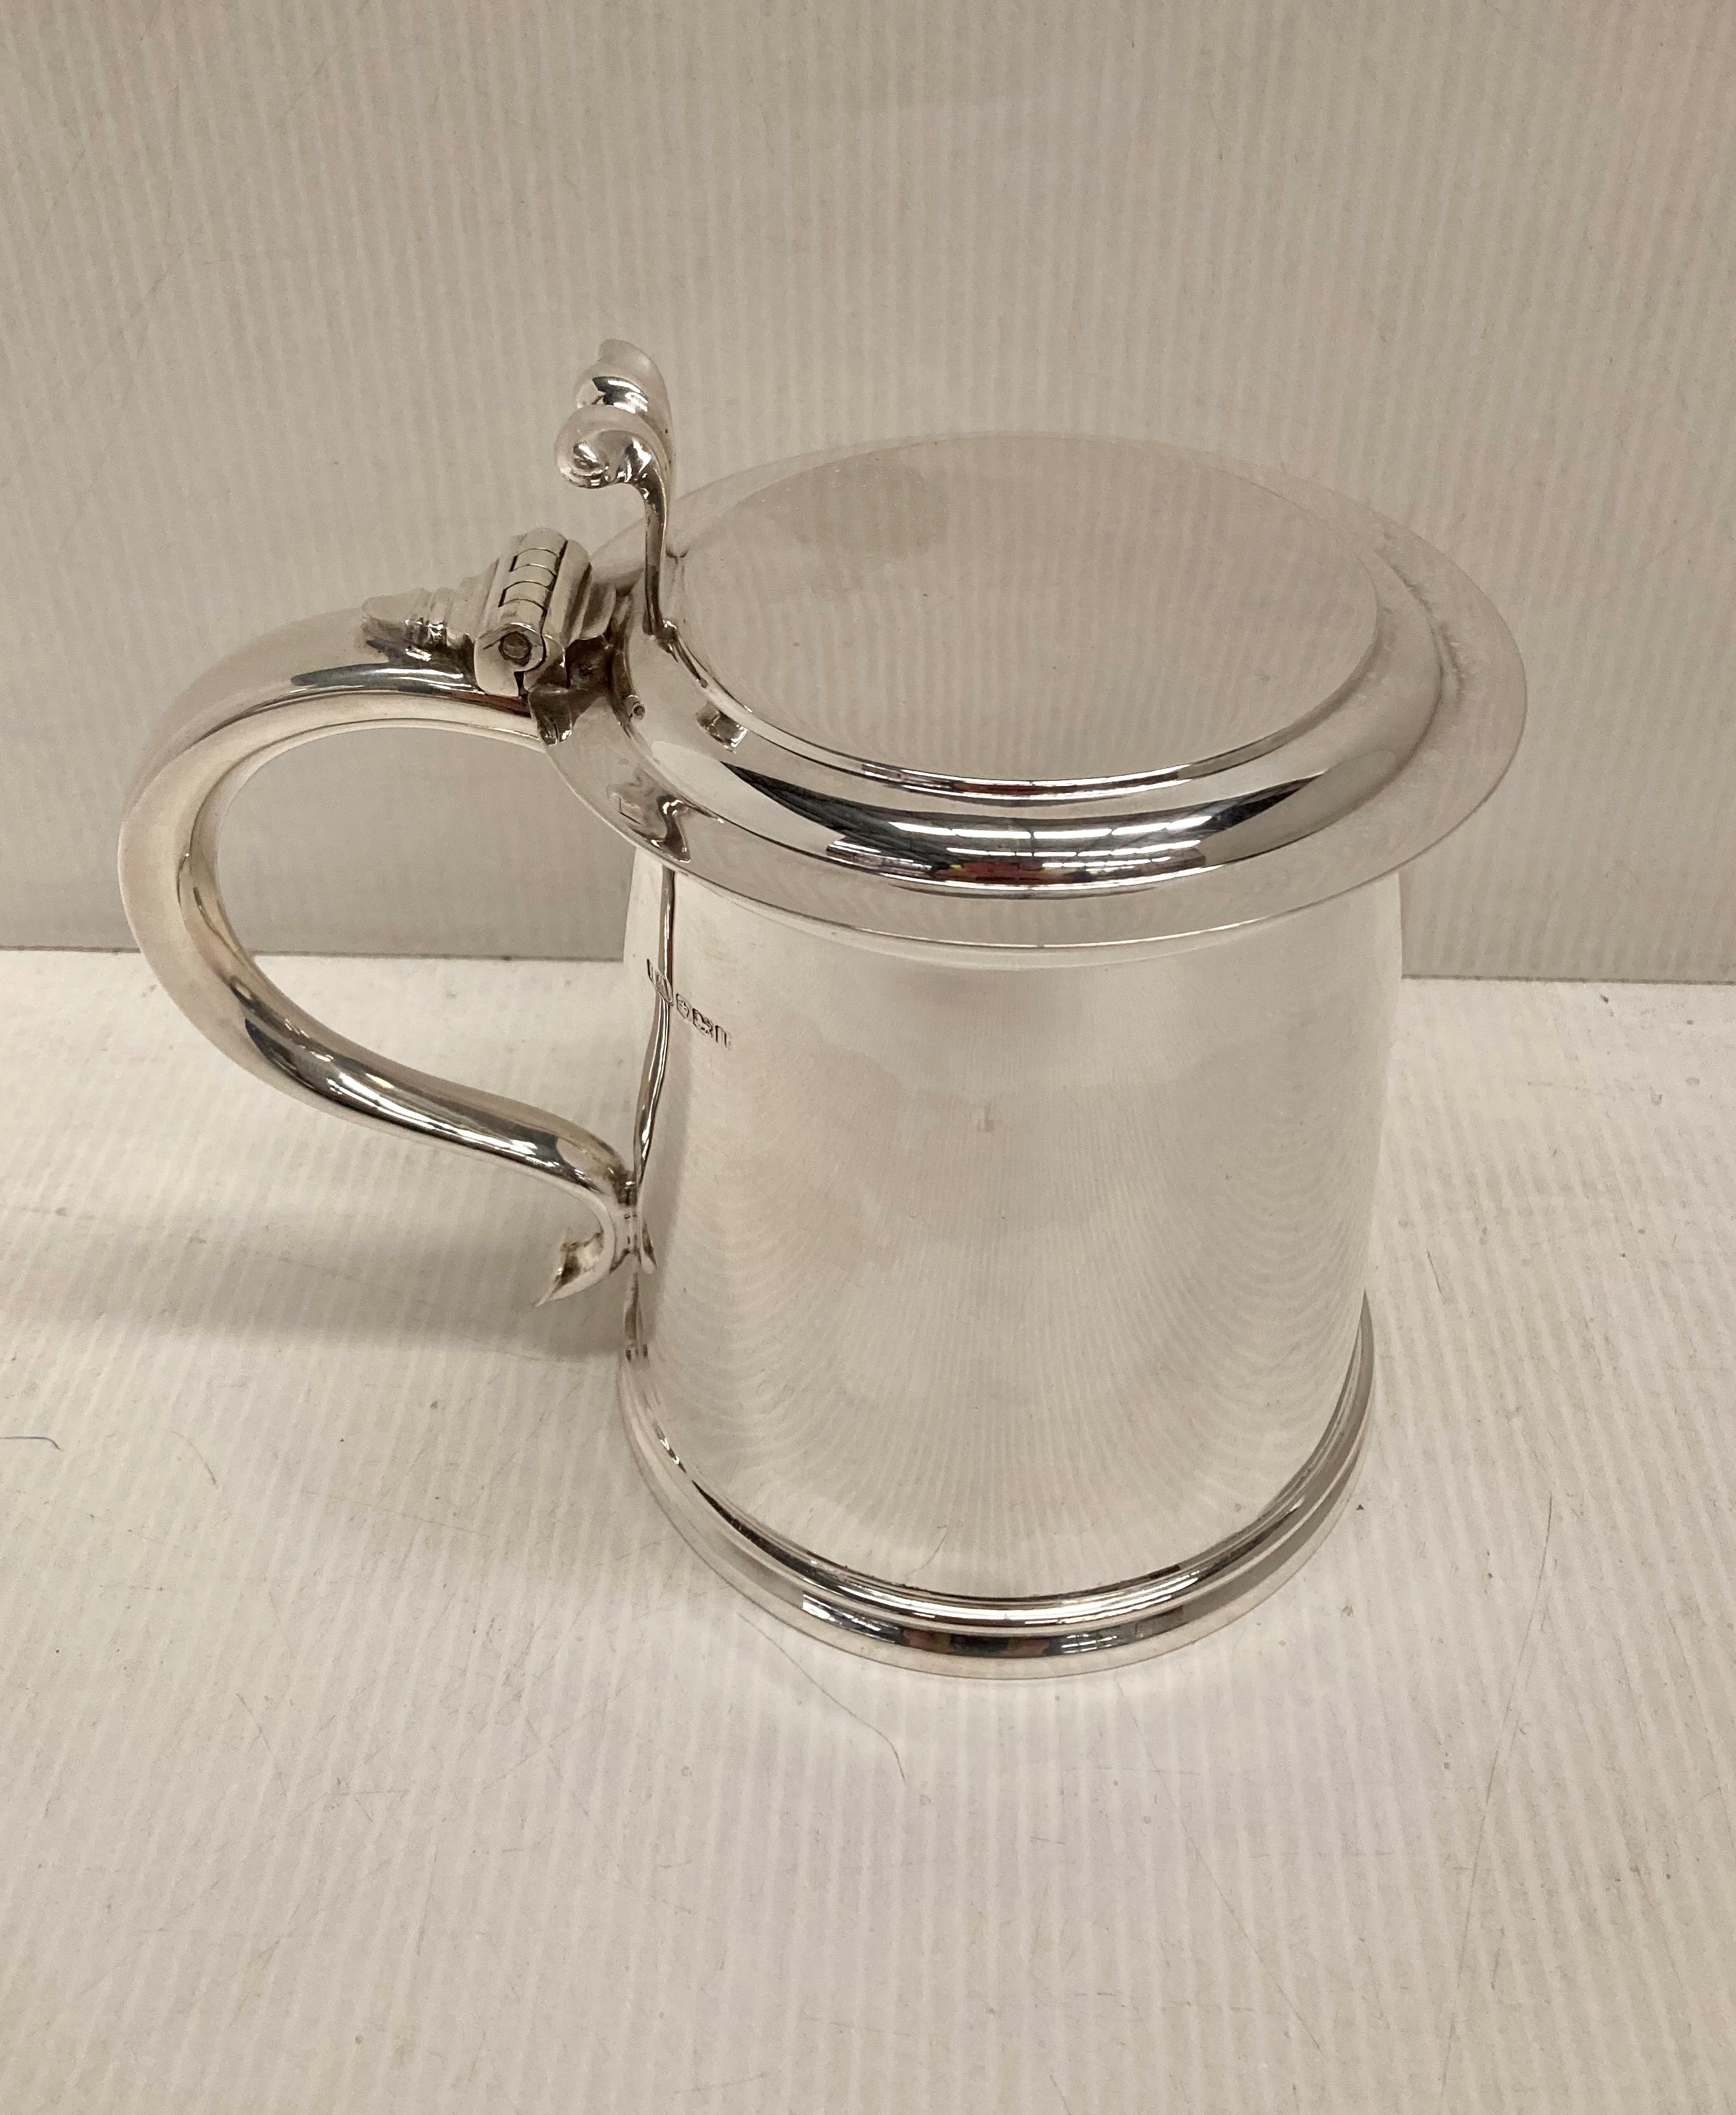 Large 17th Century style flat top tankard by Atkin Bros Sheffield 1928 with plain design and with a - Image 6 of 6